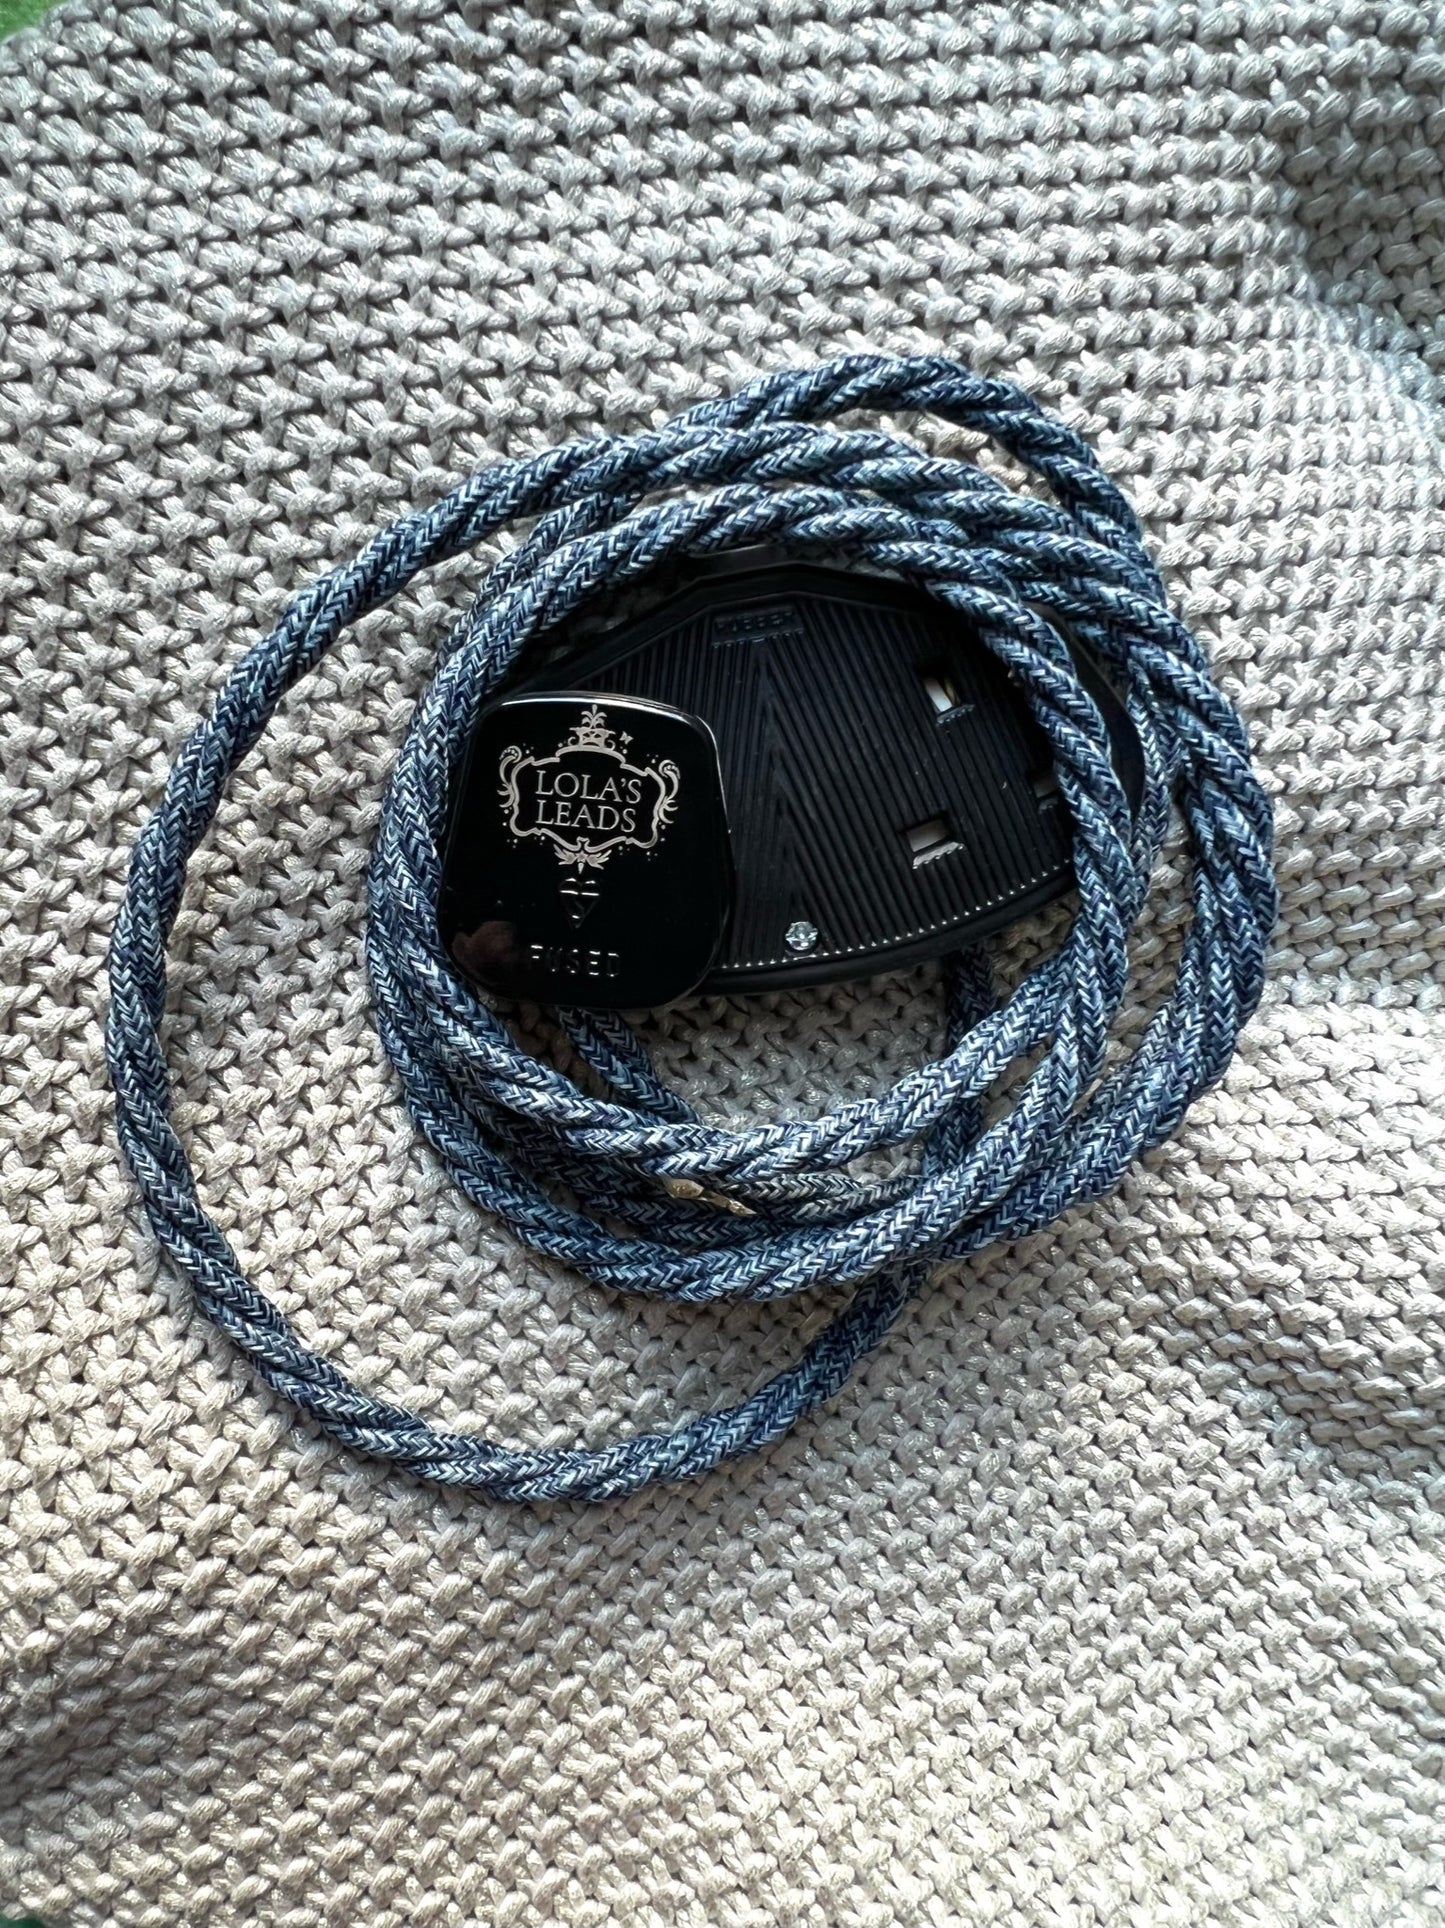 Denim - Lola's Leads Fabric Extension Cable